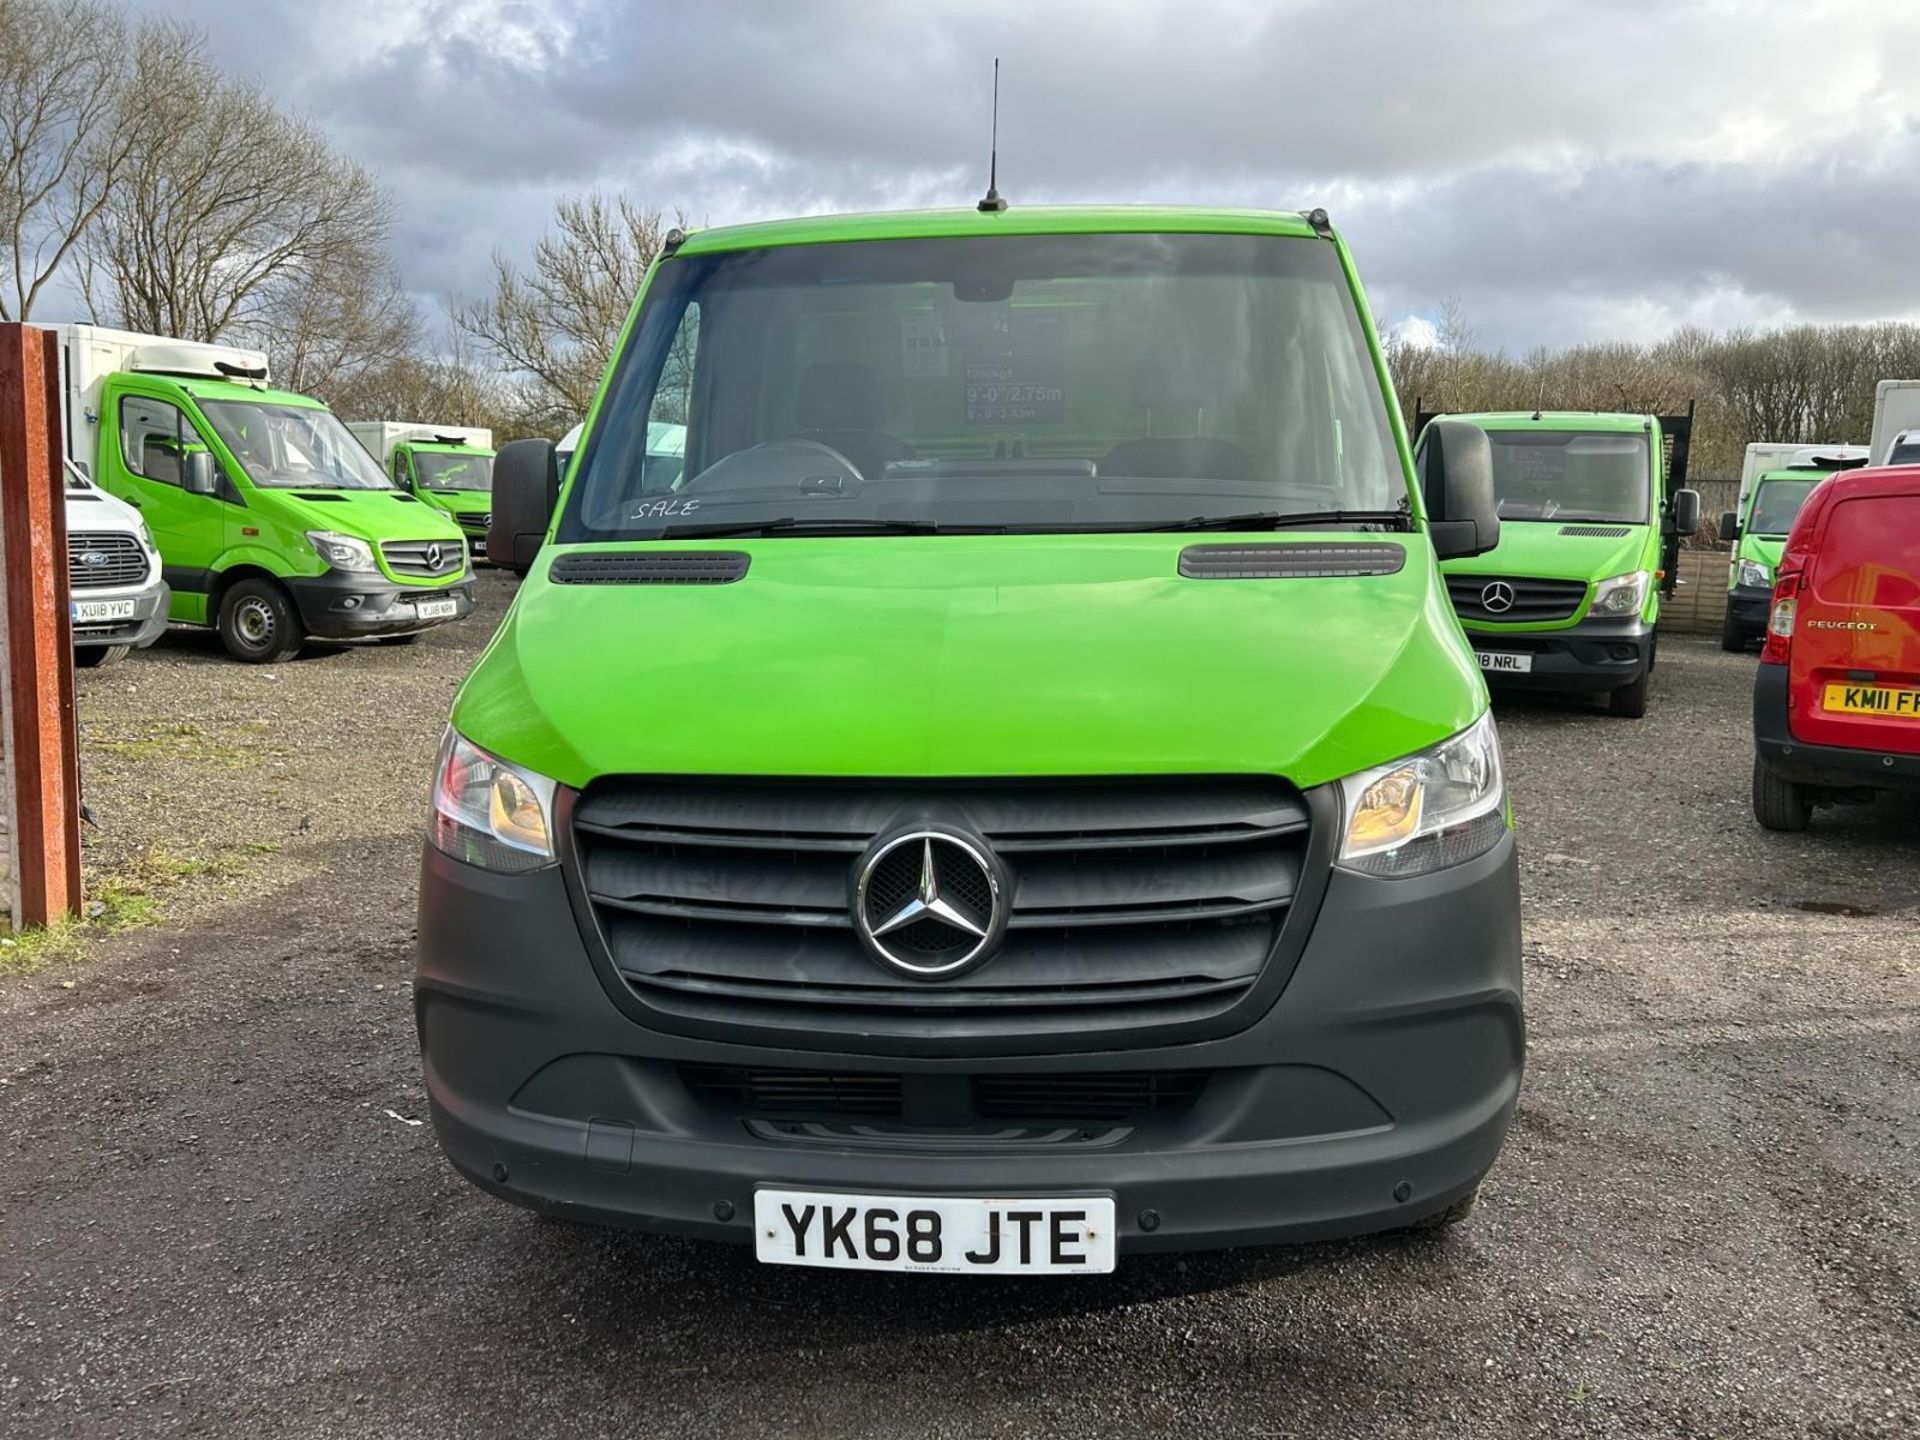 >>>SPECIAL CLEARANCE<<< 2019 MERCEDES SPRINTER 314 CDI: RWD FRIDGE FREEZER CHASSIS CAB - Image 2 of 15